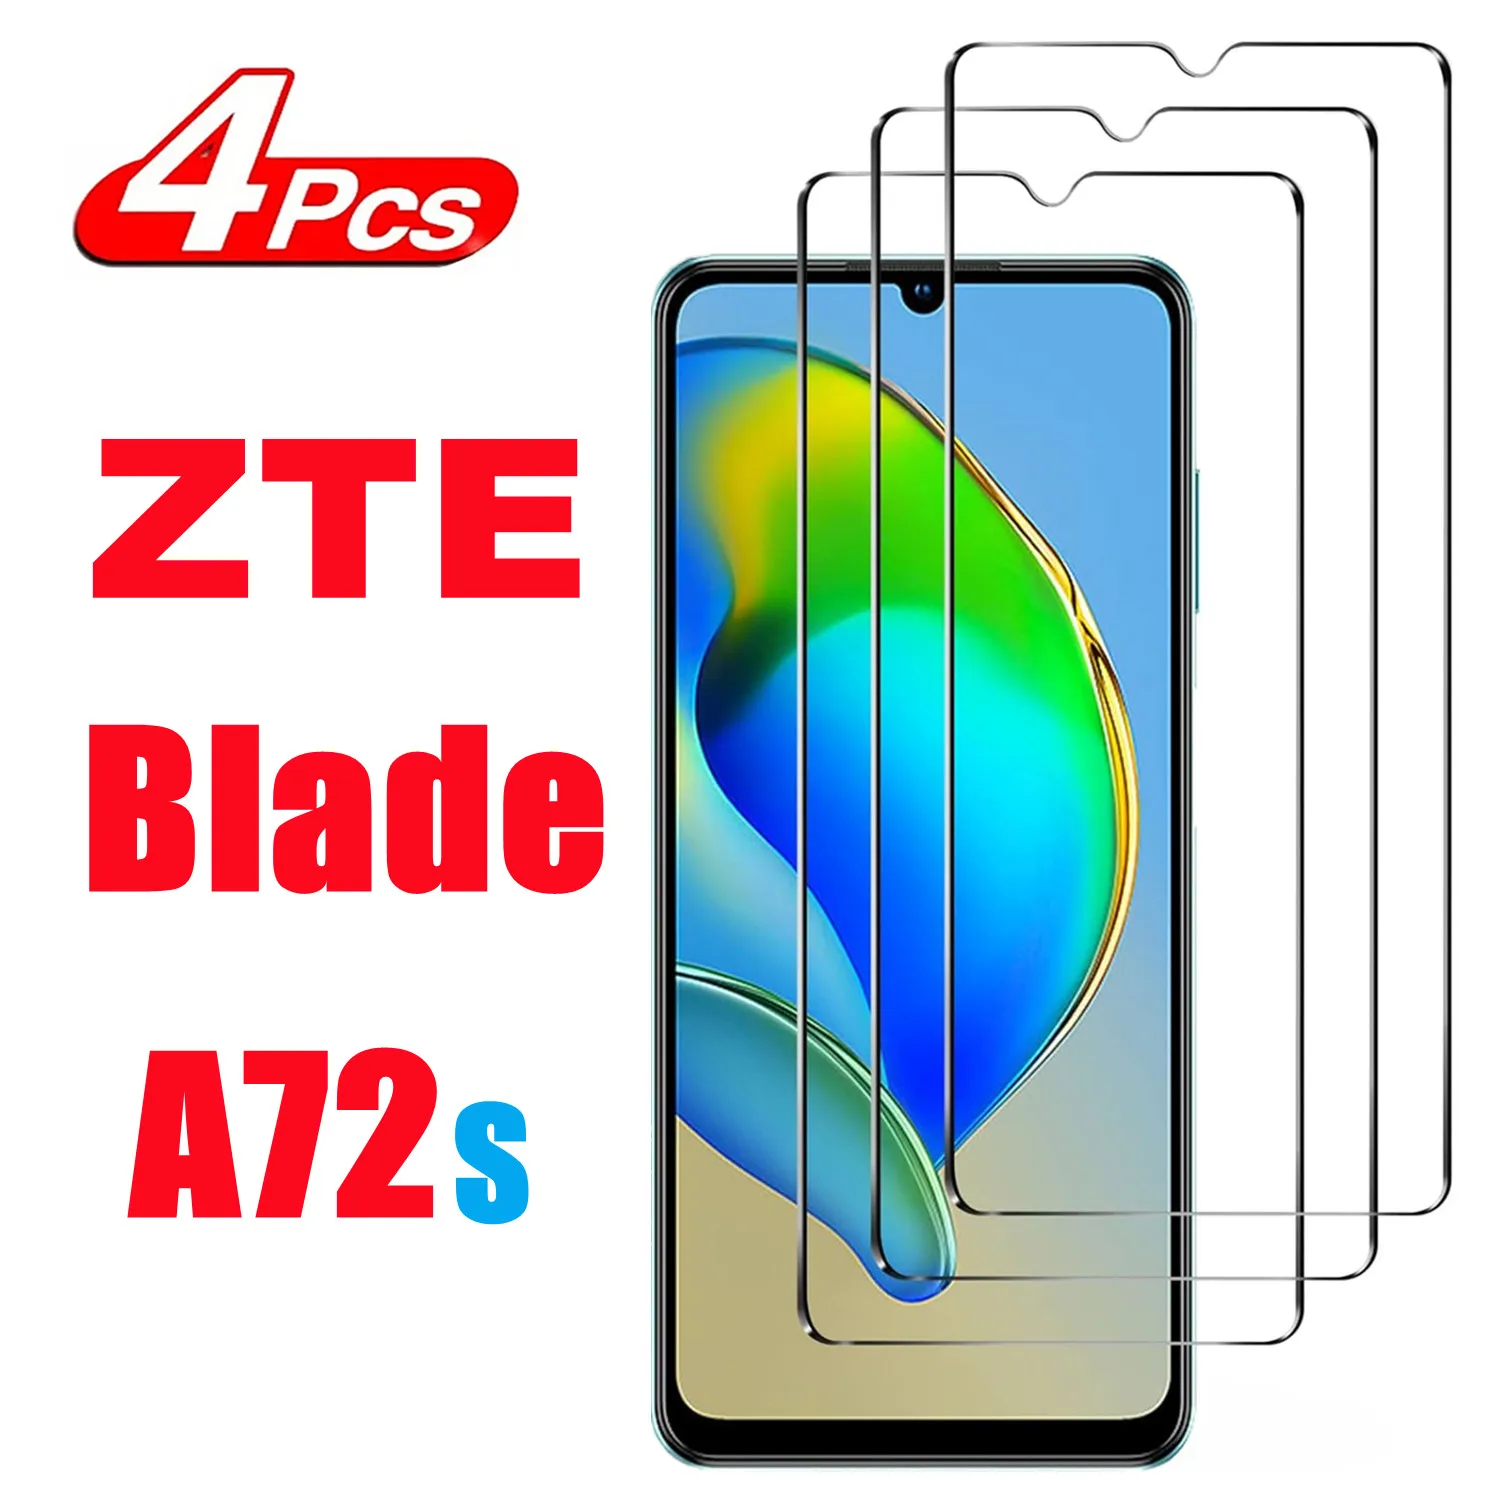 2/4 Pcs For ZTE Blade A72s 9H Tempered Glass For ZTE Blade A72s Screen Protector Glass Film jonsnow tempered glass for zte blade v2020 full screen coverage protective film for zte blade v2020 6 53 screen protector